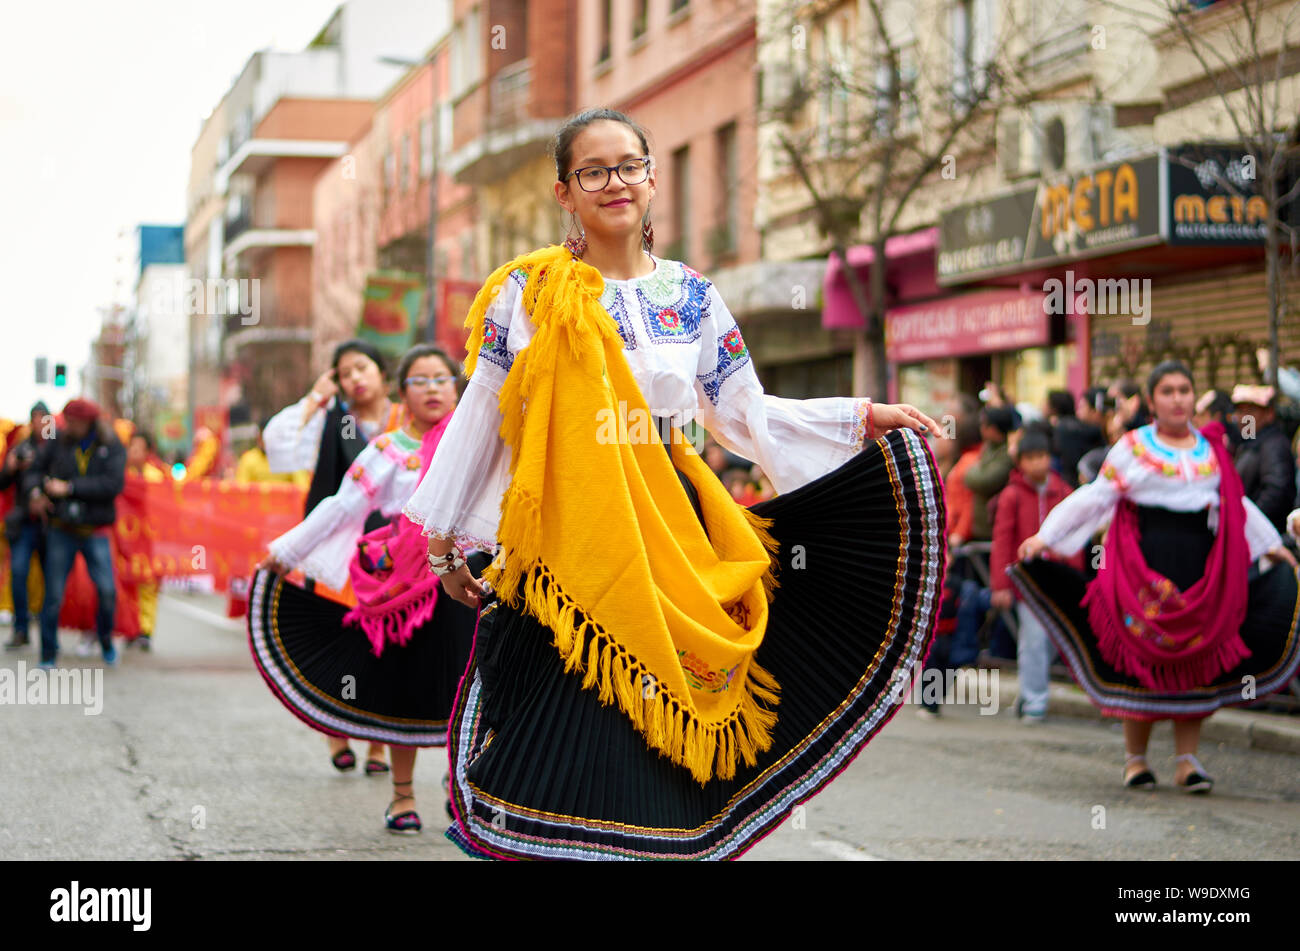 PARADE IN THE DISTRICT OF USERA IN MADRID TO CELEBRATE CHINESE NEW YEAR Stock Photo